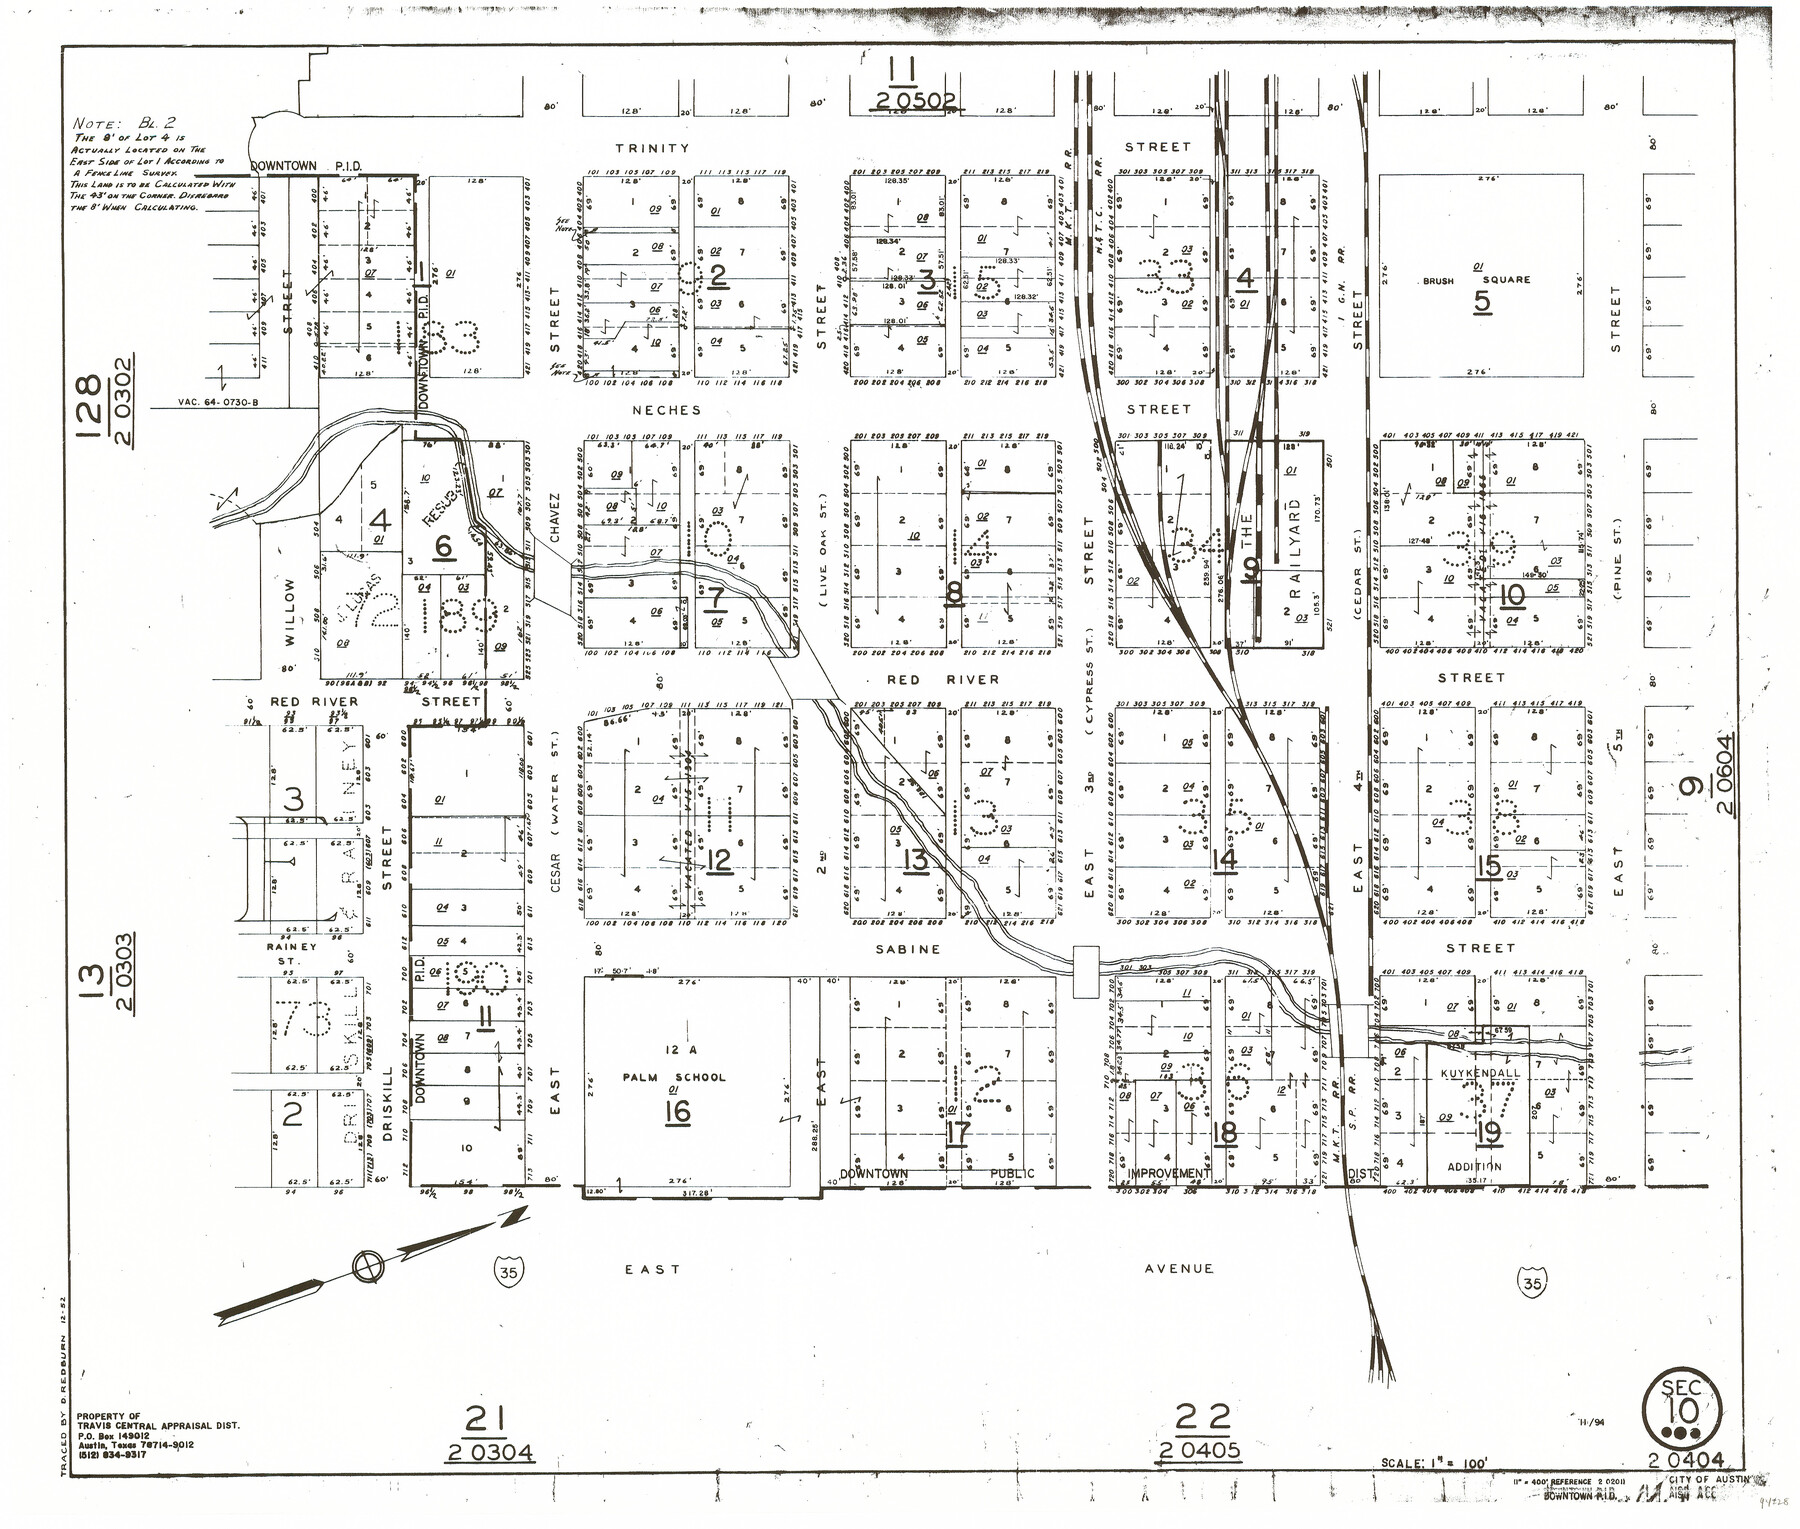 94228, Travis County Appraisal District Plat Map 2_0404, General Map Collection